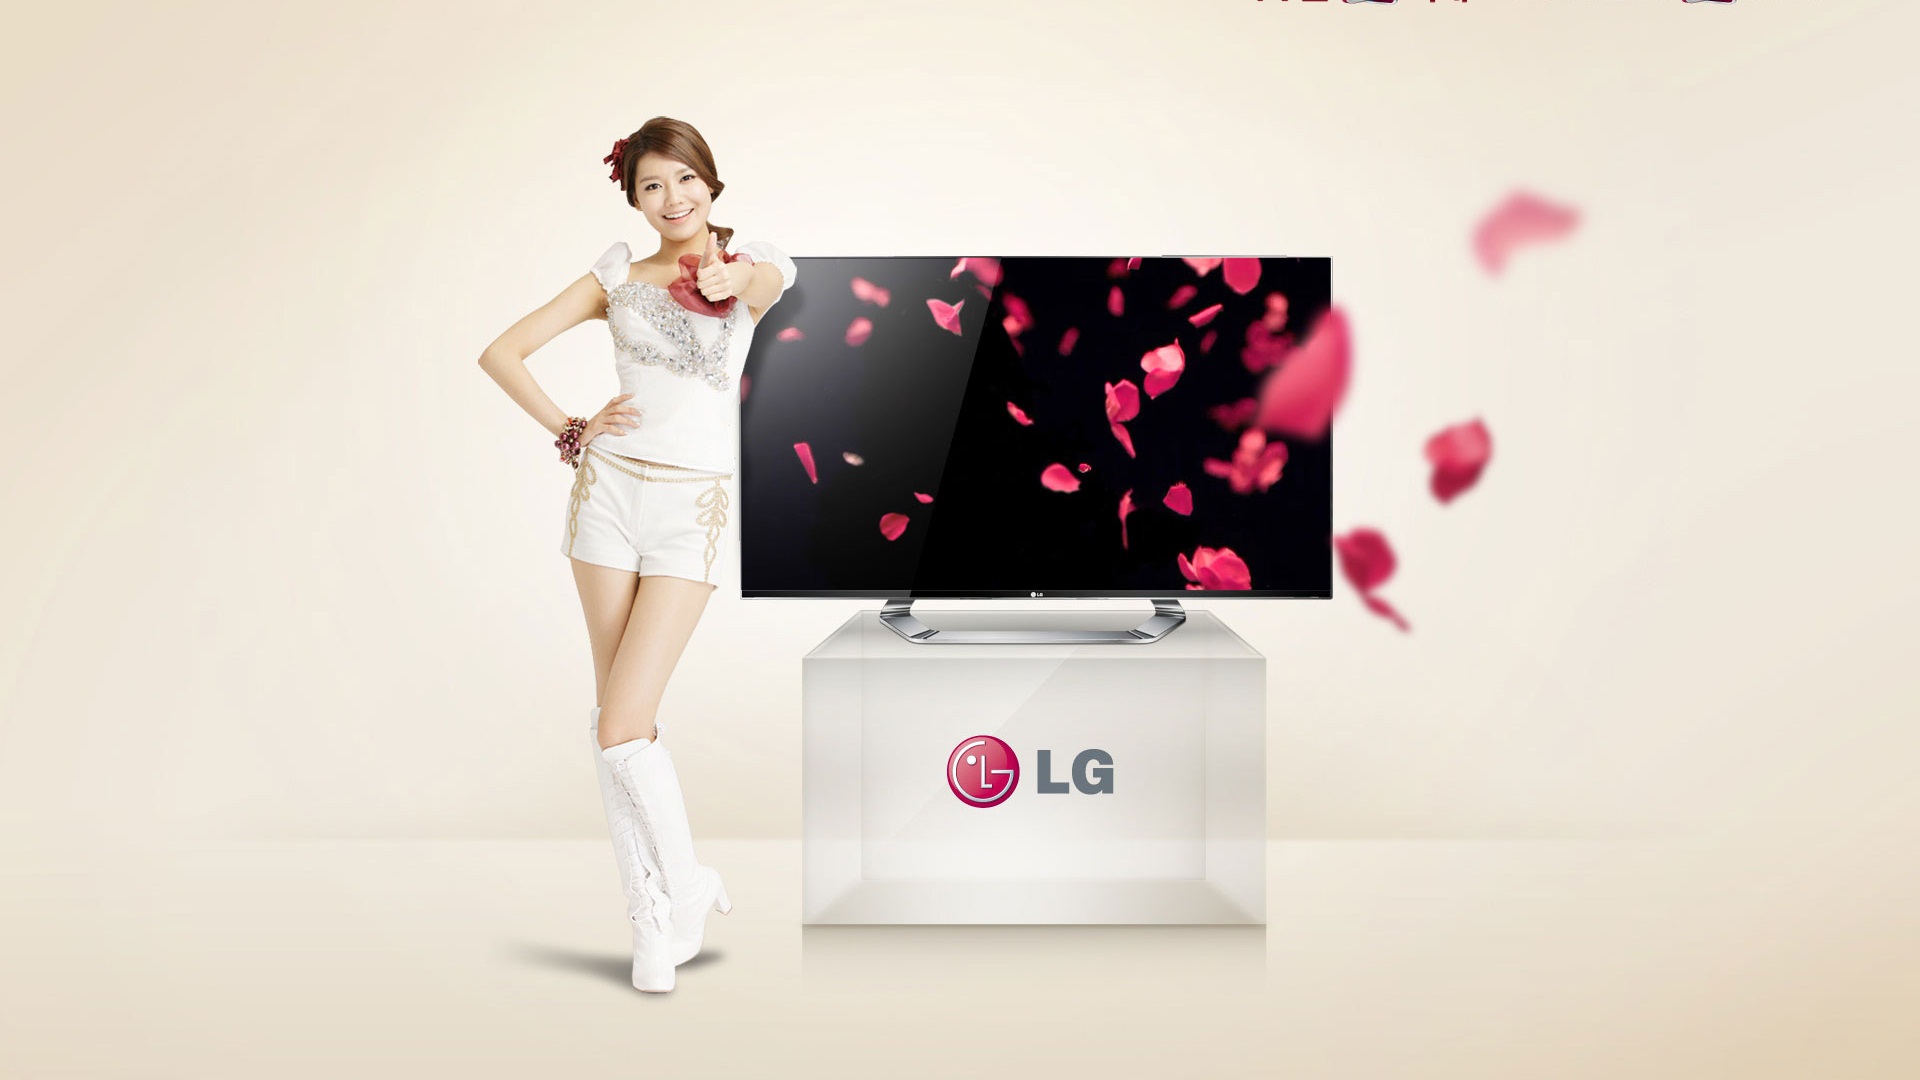 Girls Generation ACE and LG endorsements ads HD wallpapers #12 - 1920x1080